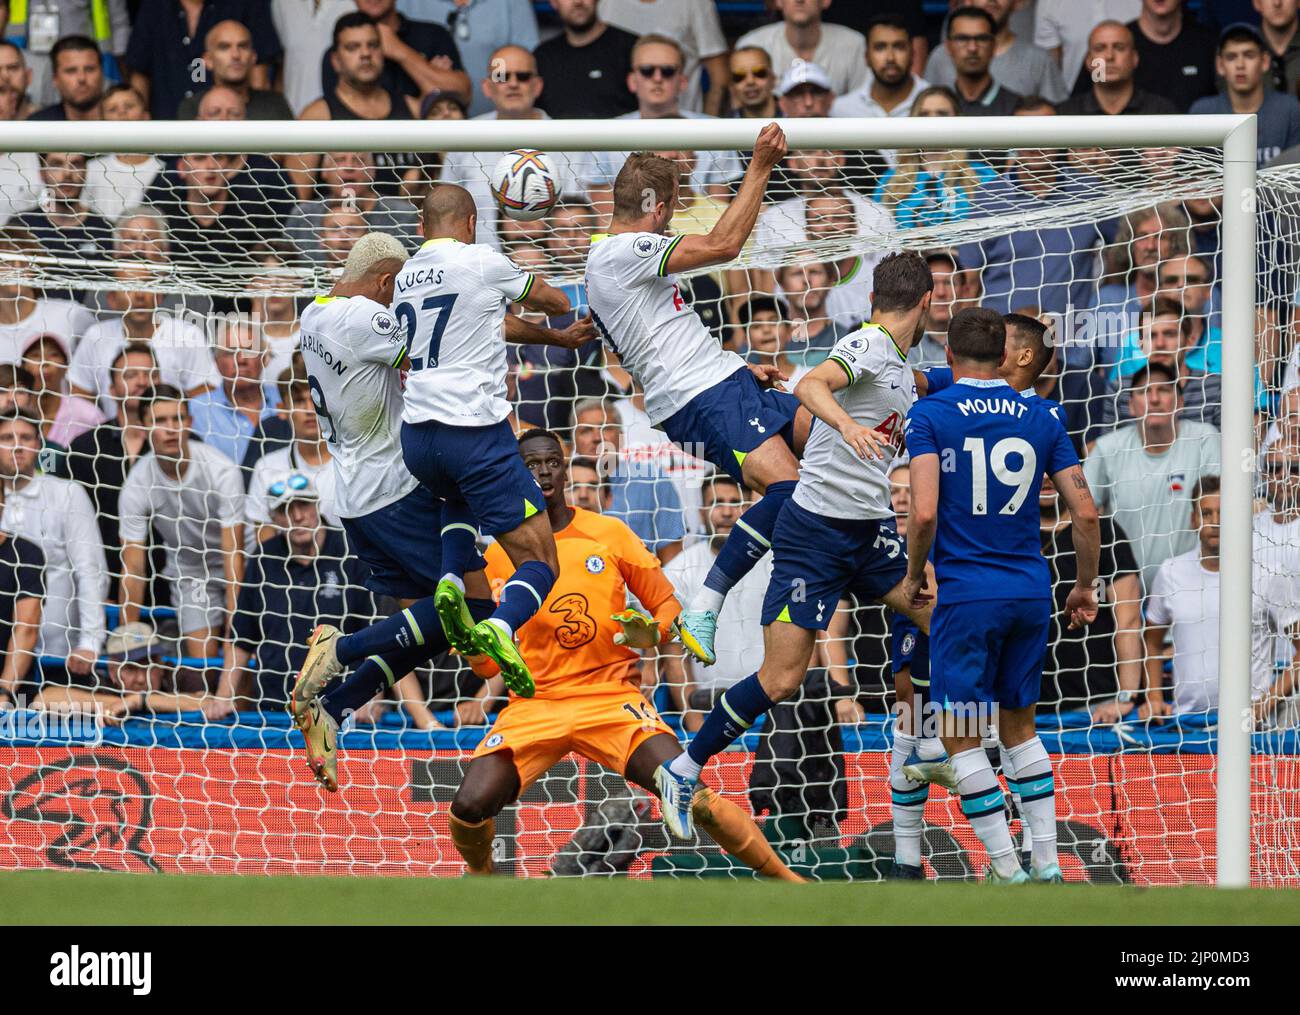 London, UK. 15th Aug, 2022. Tottenham Hotspur's Harry Kane (C) scores his side's second equalising goal during the English Premier League match between Chelsea and Tottenham Hotspur in London, Britain, on Aug. 14, 2022. The game ended in a 2-2 draw. Credit: Xinhua/Alamy Live News Stock Photo